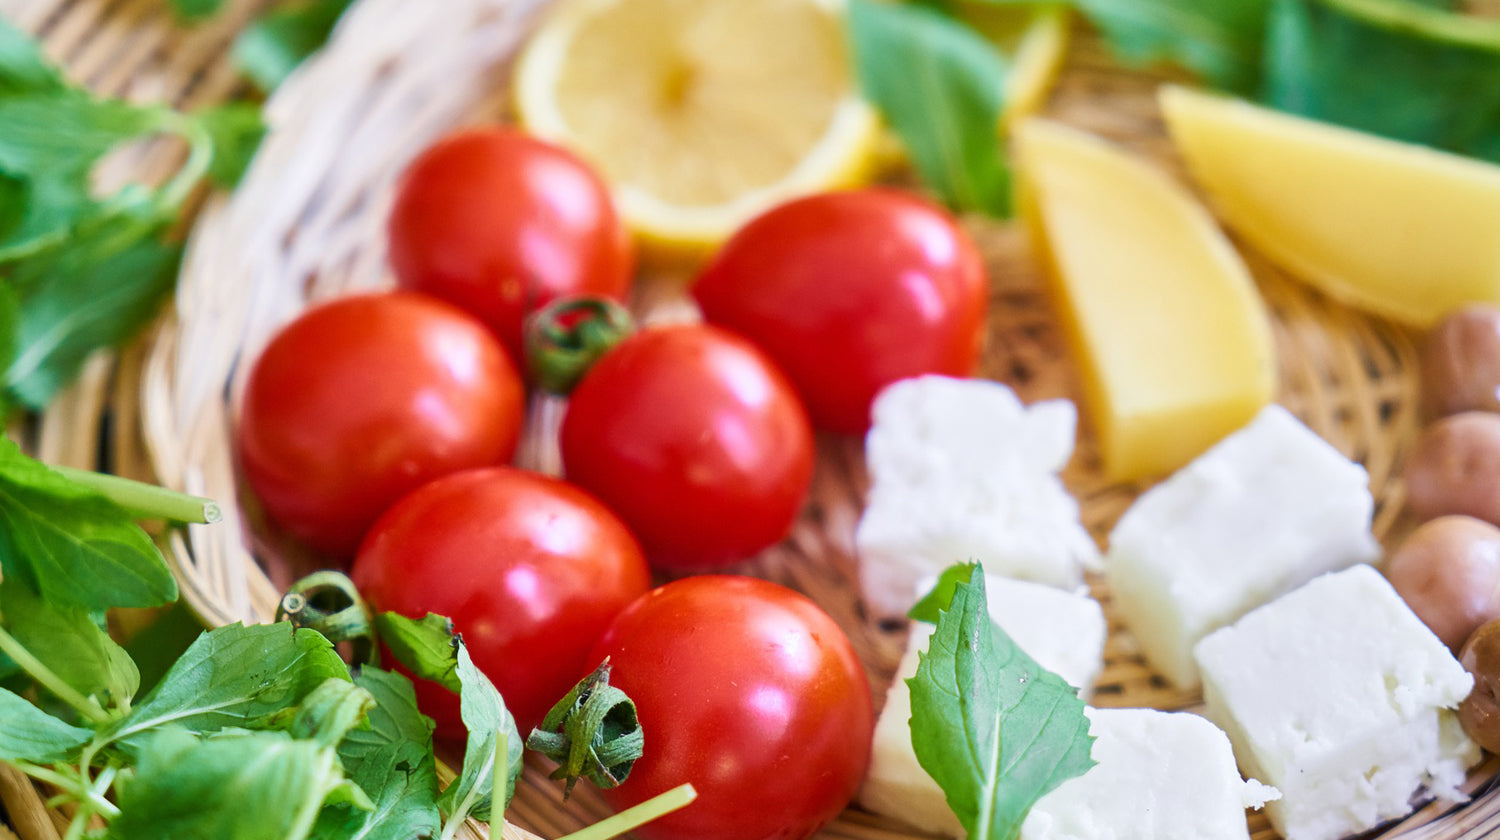 How Does the Mediterranean Diet Affect Your Gut Microbiome?